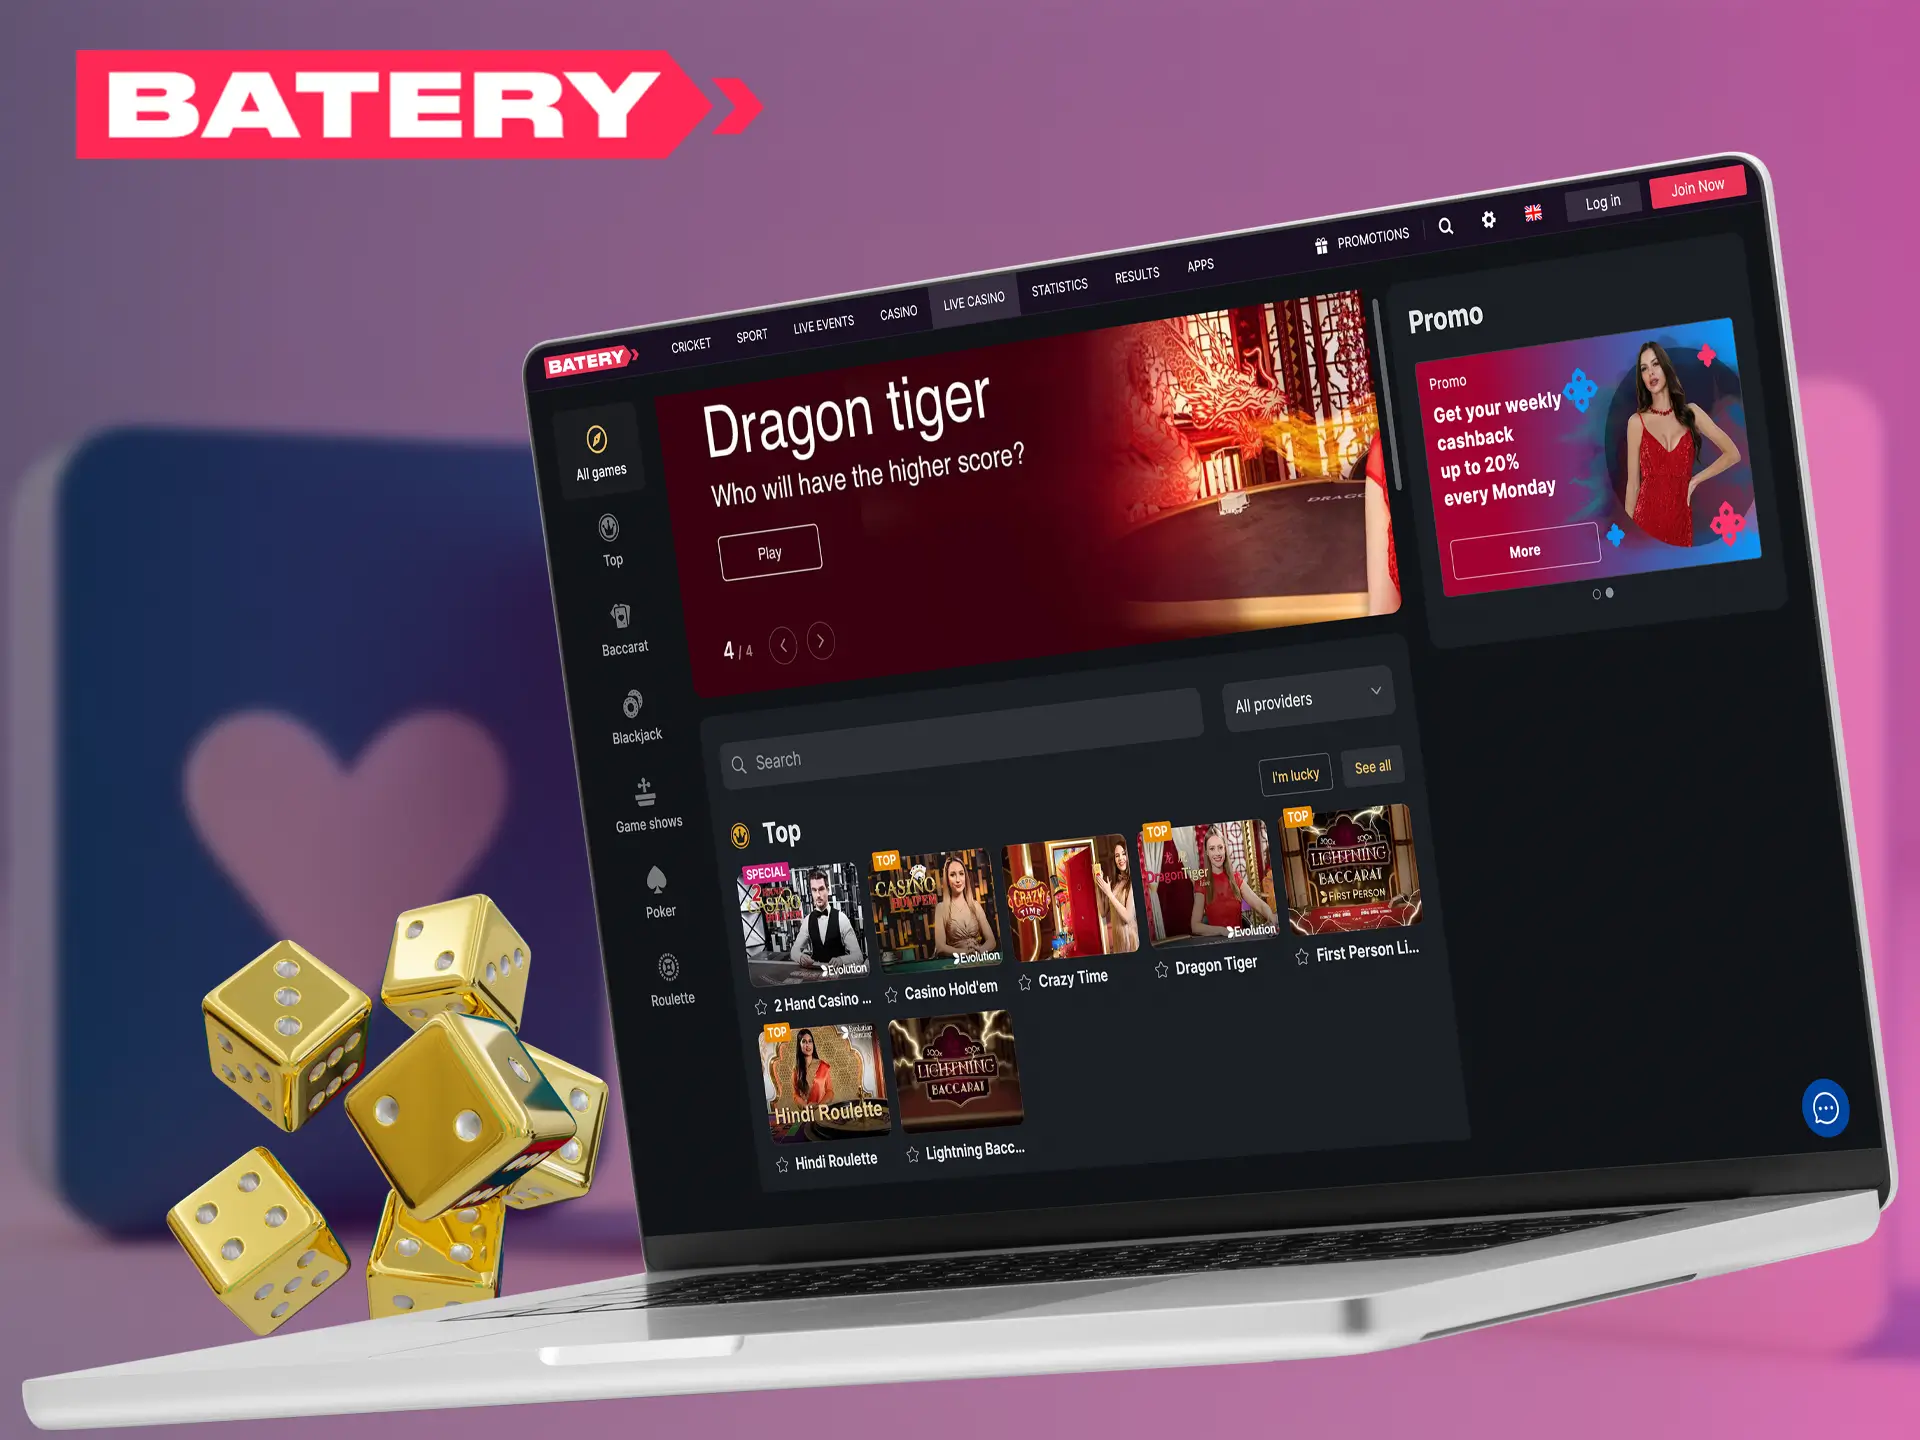 Show off your skills and experience when playing with real dealers at Batery Casino.